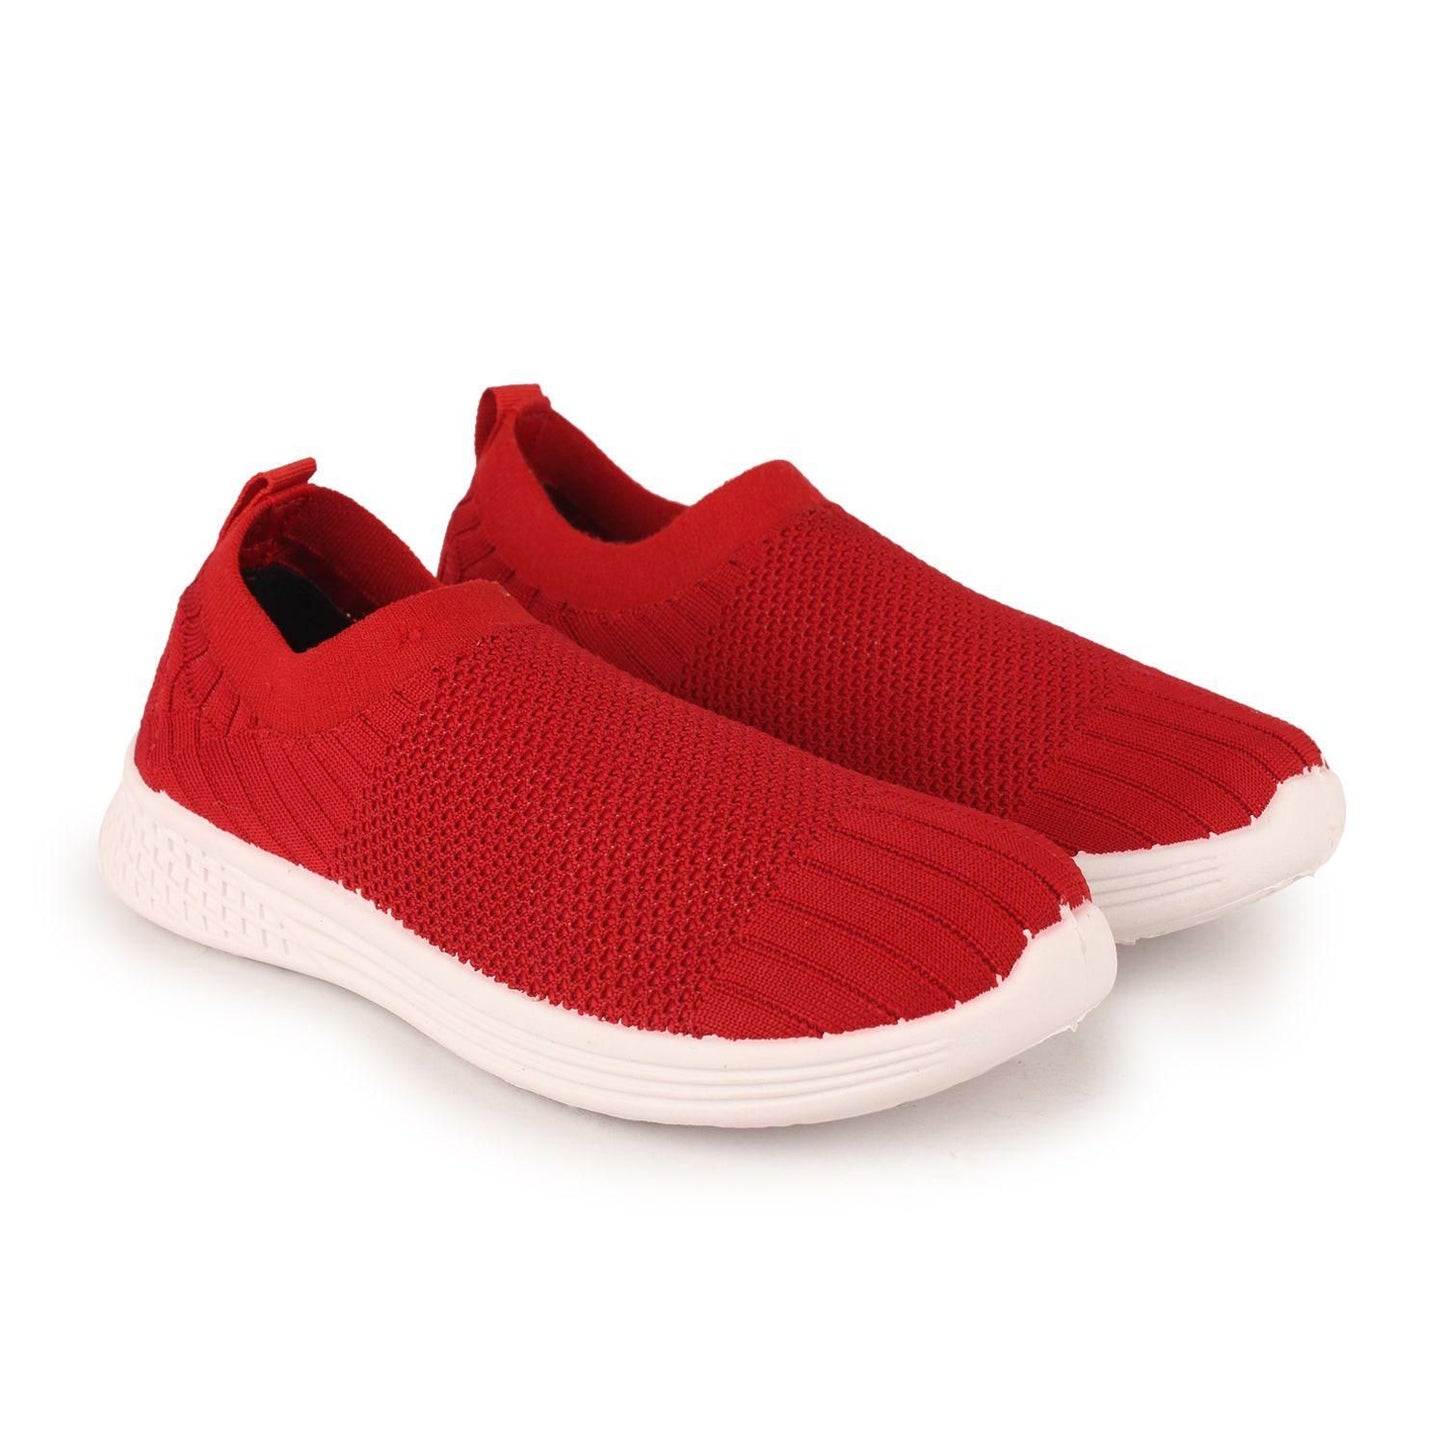 Monex New Latest Red Shoes For Women